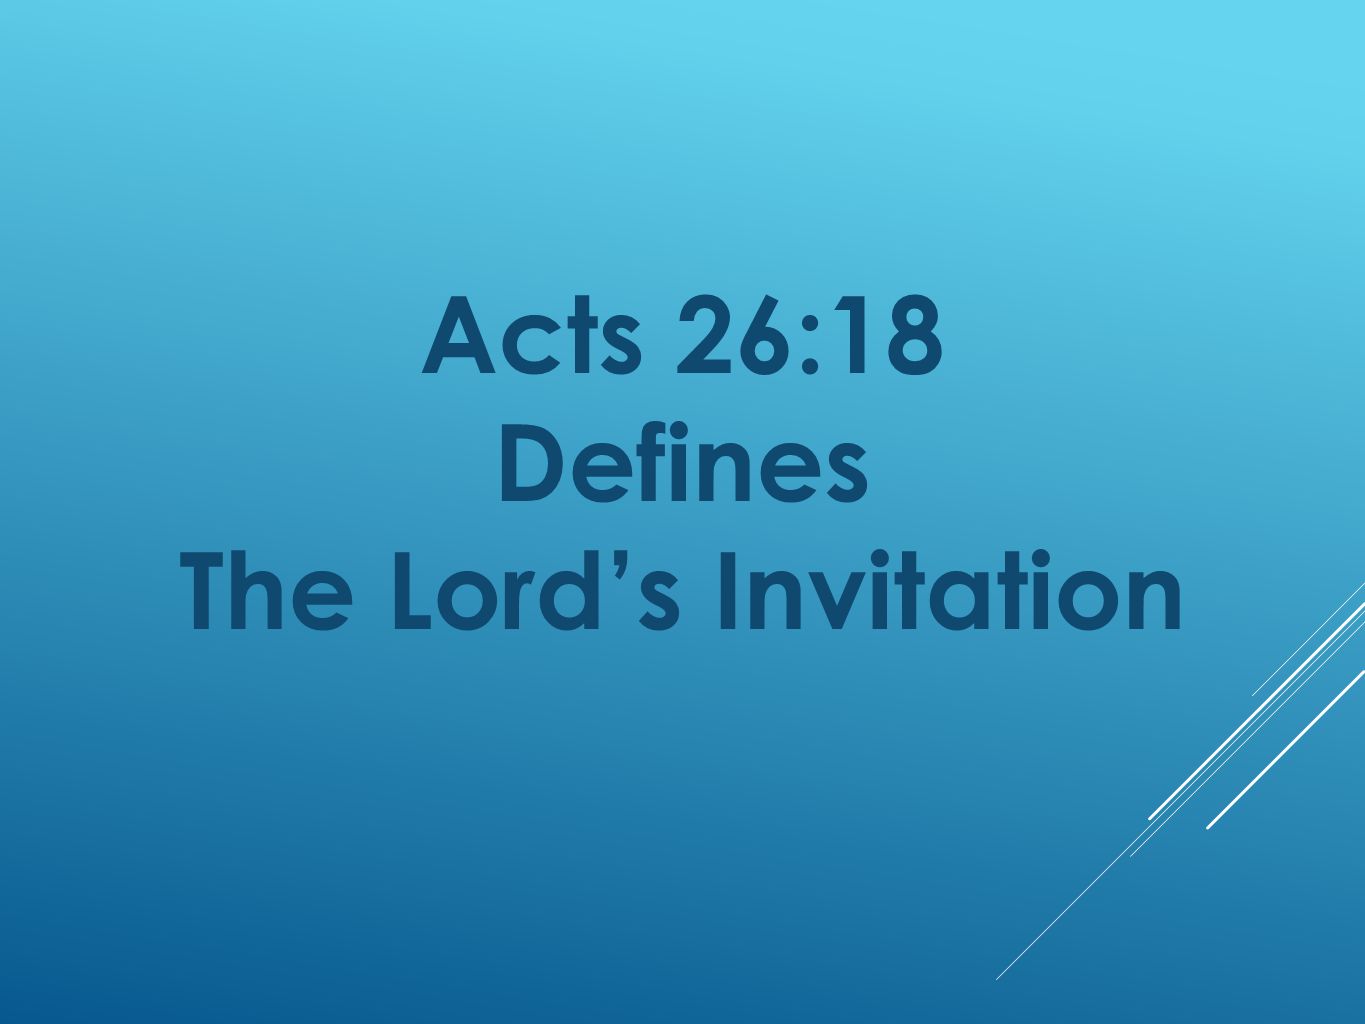 Acts 26:18 Defines The Lord’s Invitation